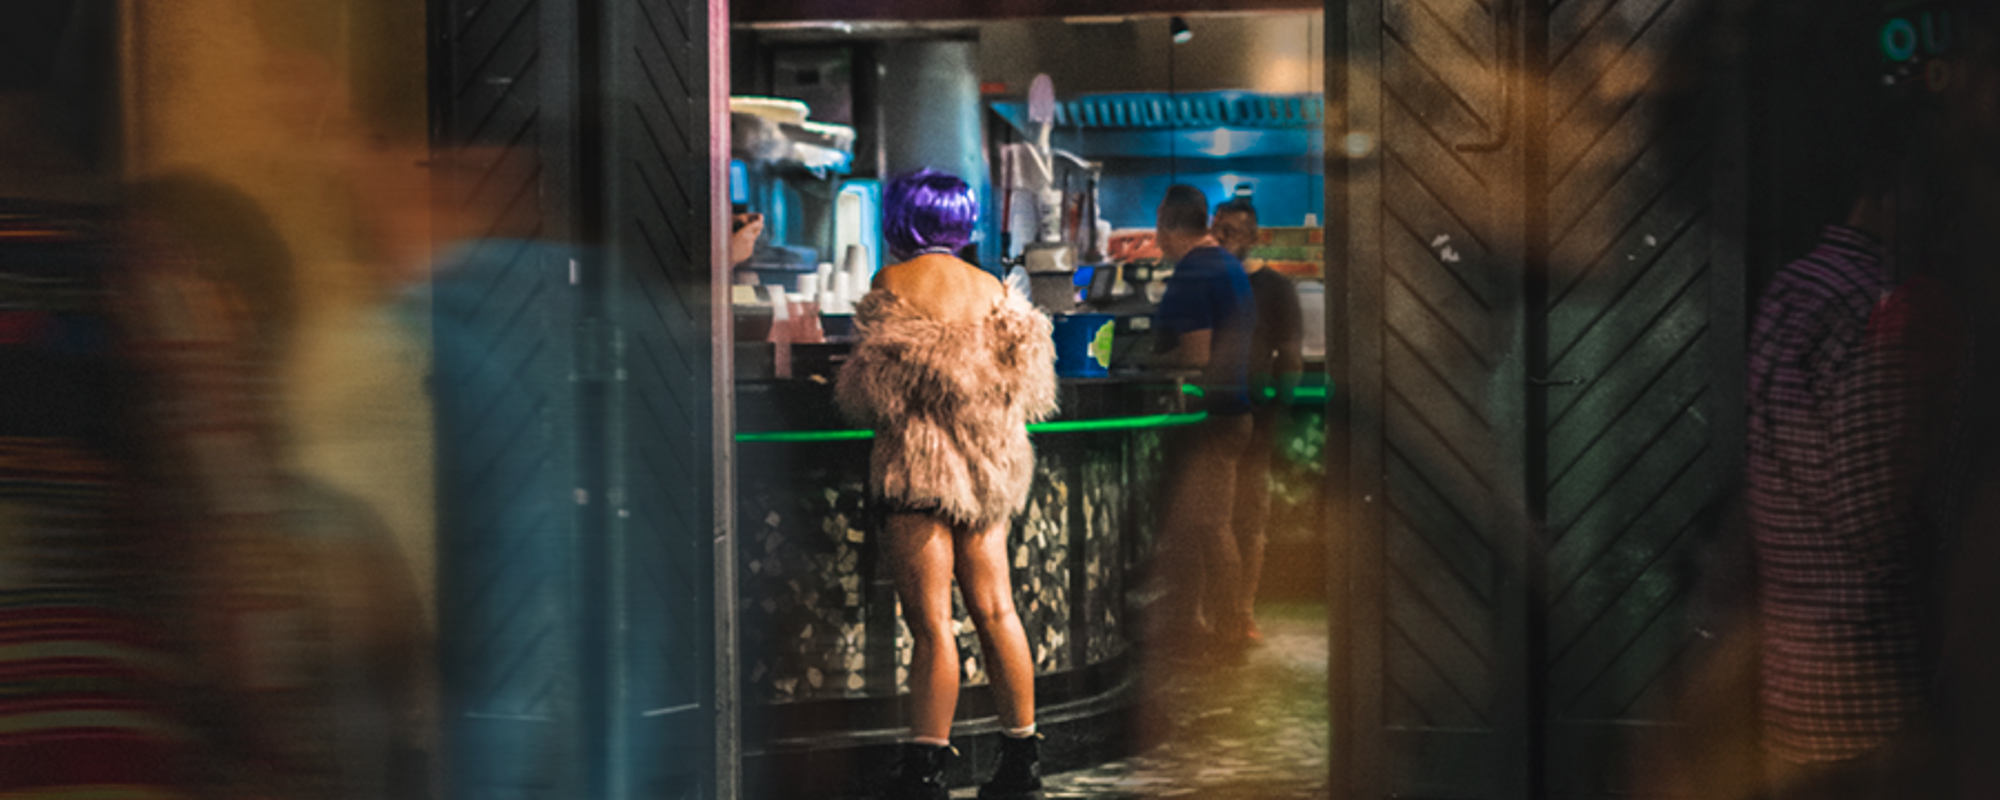 New Orleans Bourbon Street Scenes // Smudged Neon and the Sense of Strangers in the Night [Mildly NSFW]